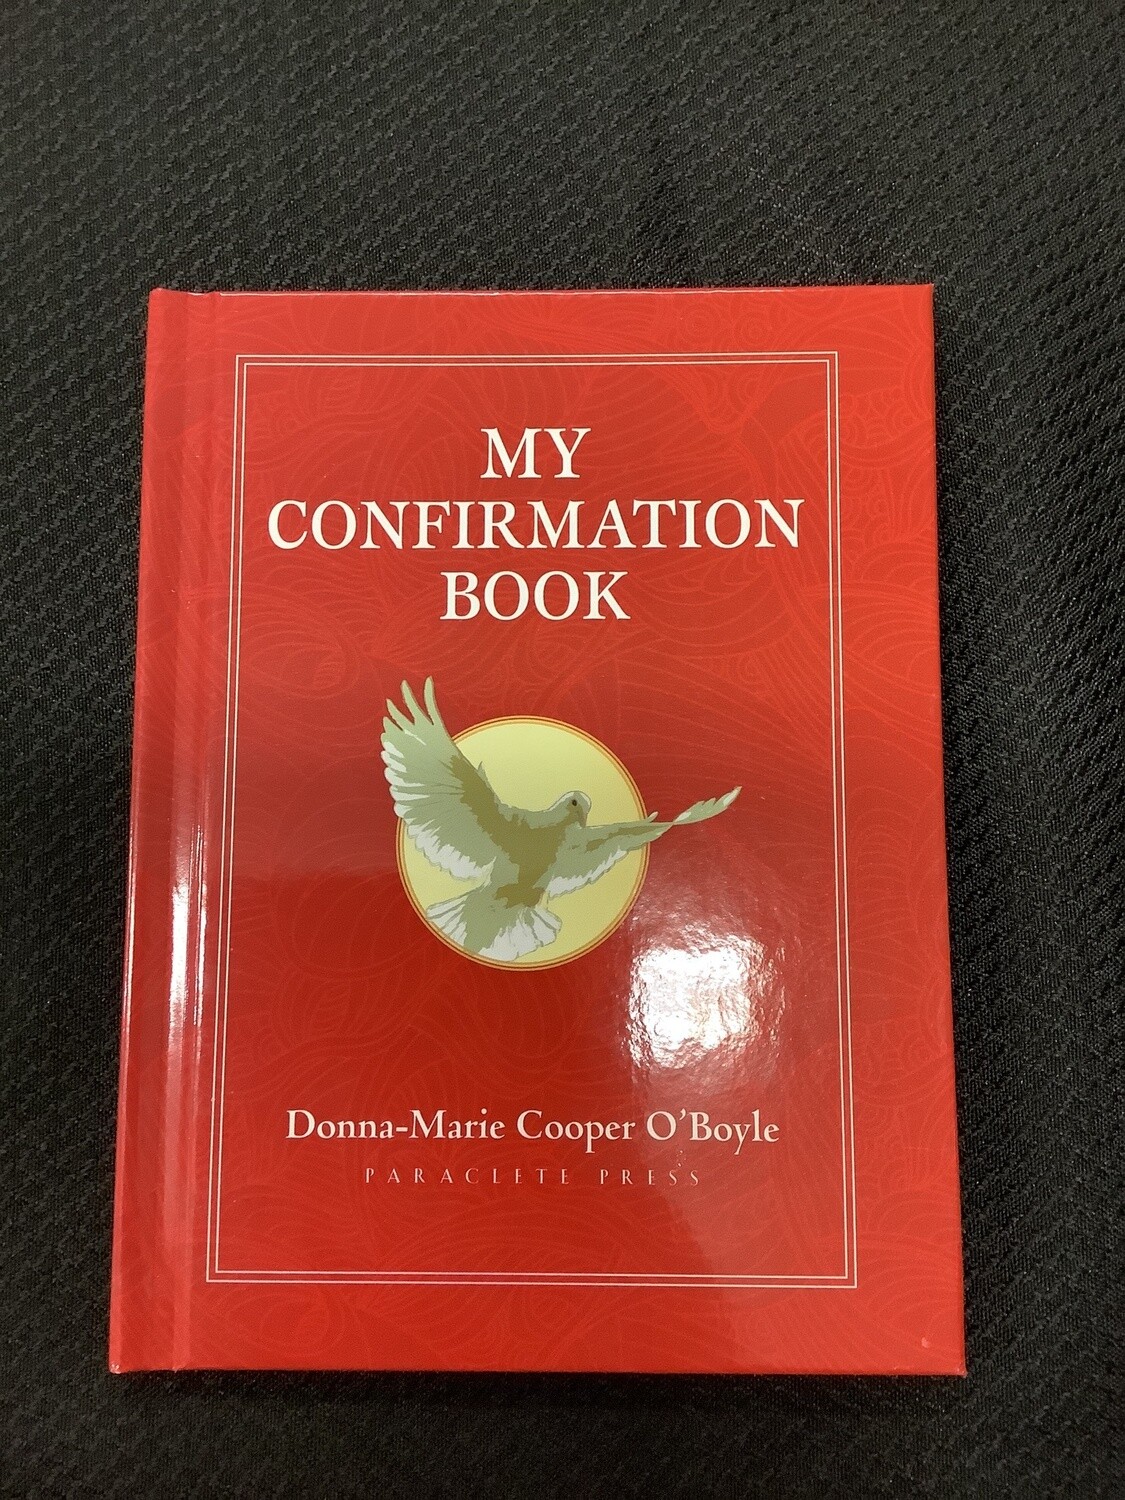 My Confirmation Book - Donna-Marie Cooper O’Boyle